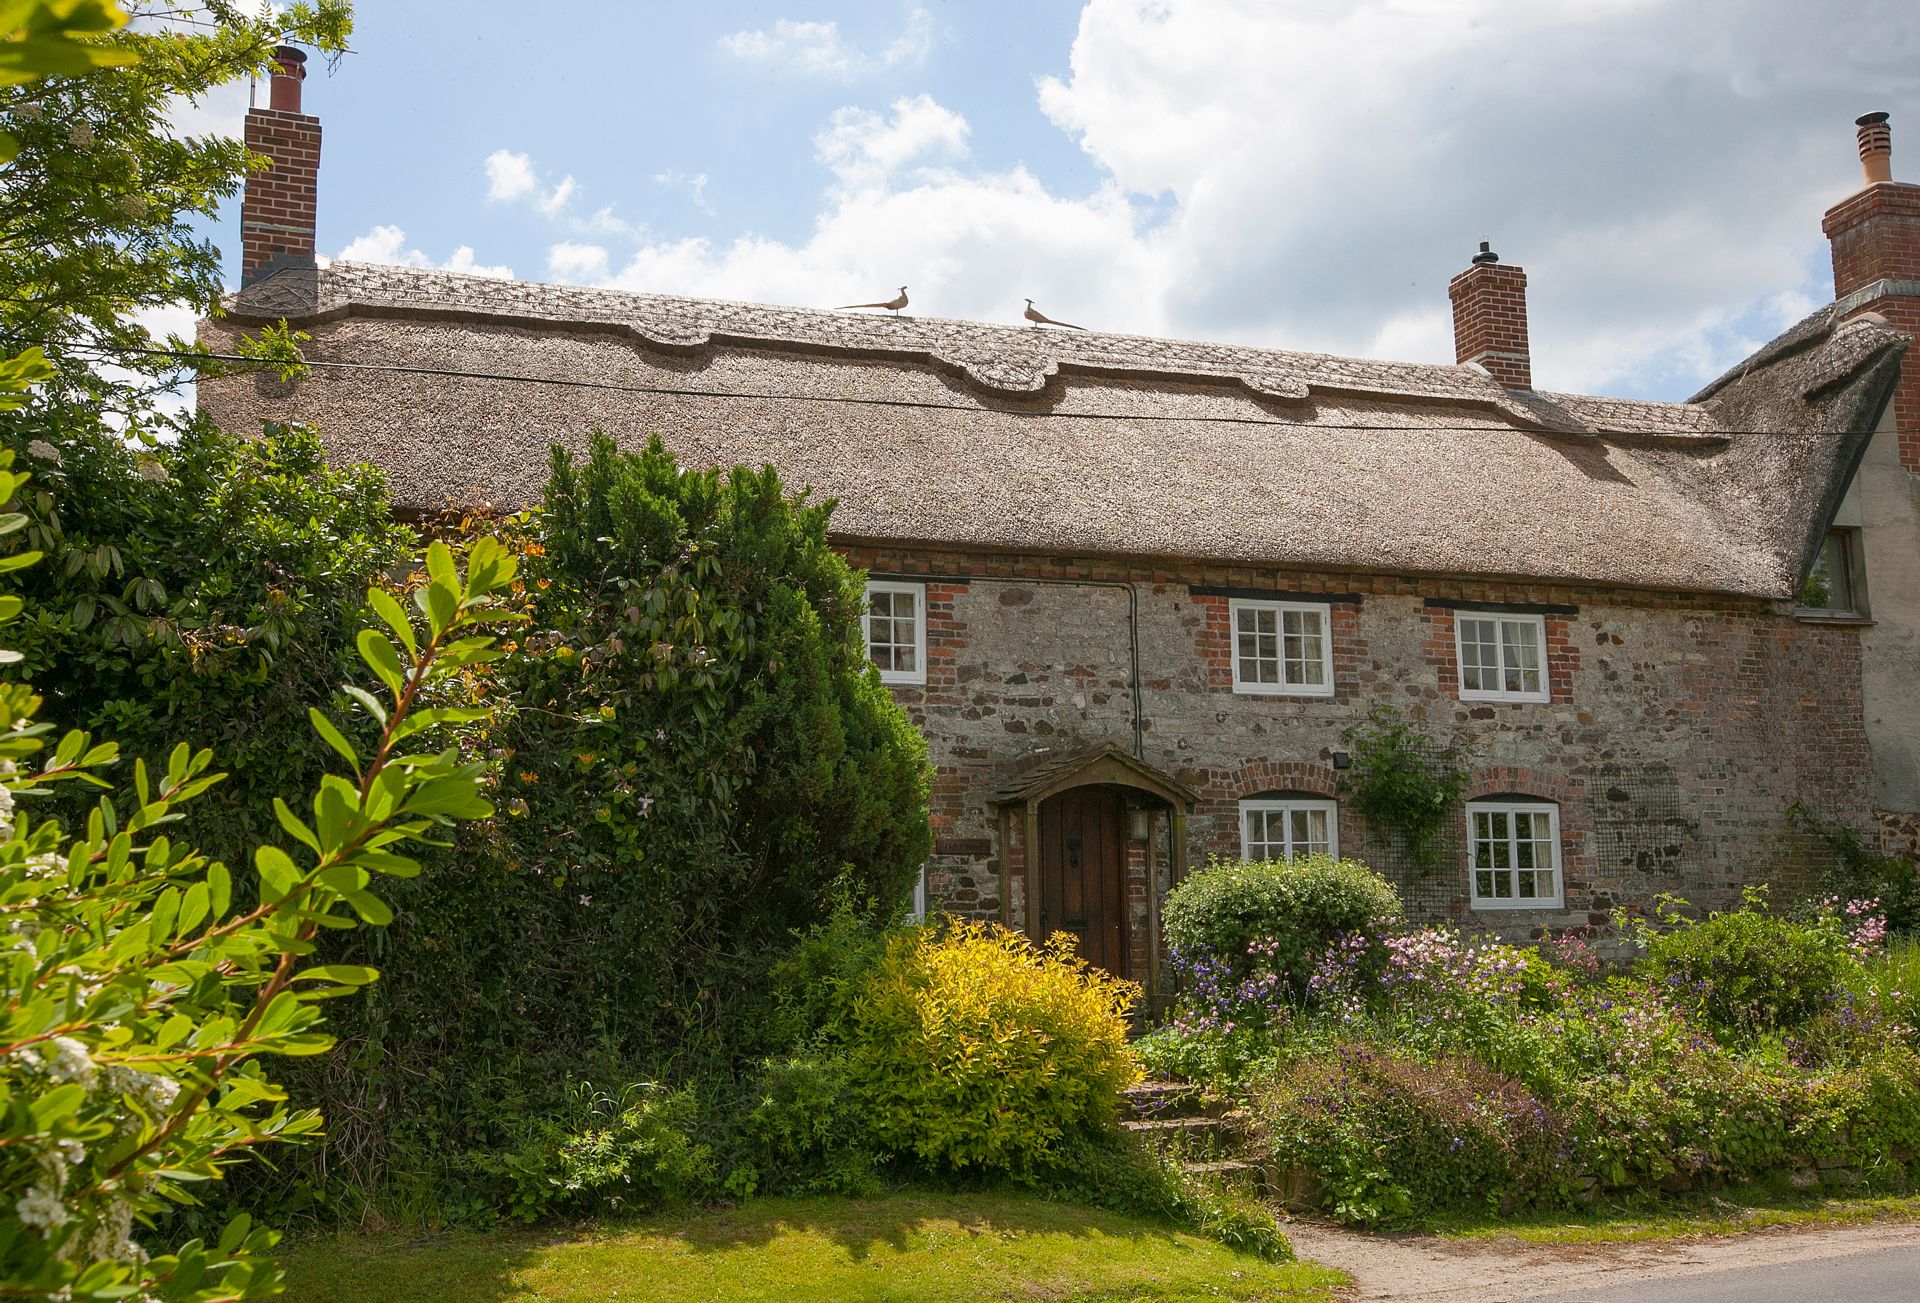 More information about Odd Nod Cottage - ideal for a family holiday